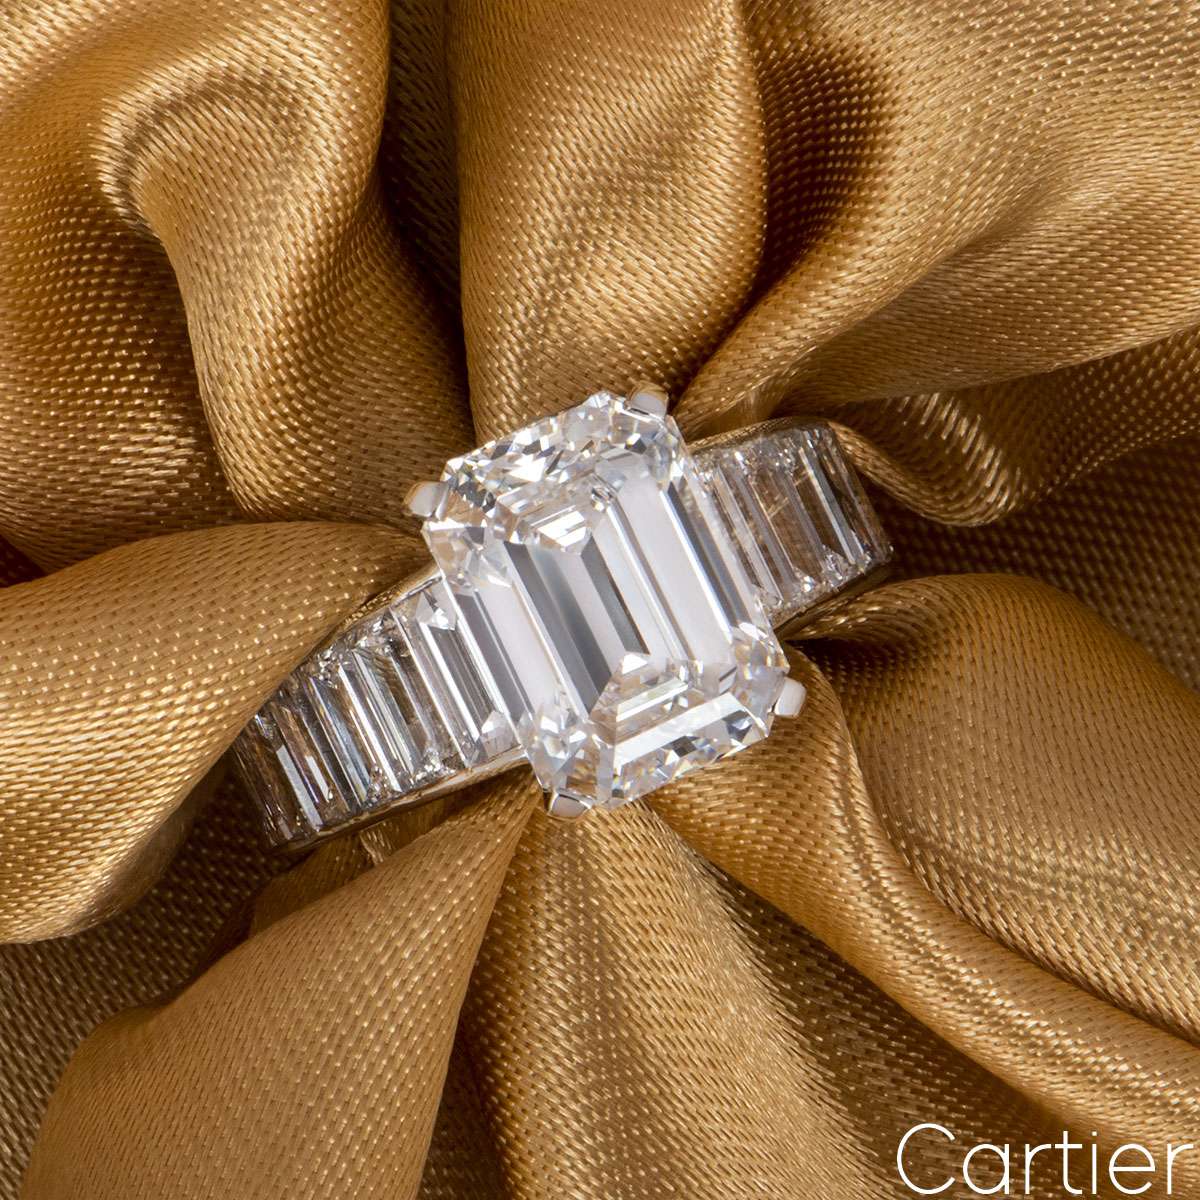 cartier diamond rings images